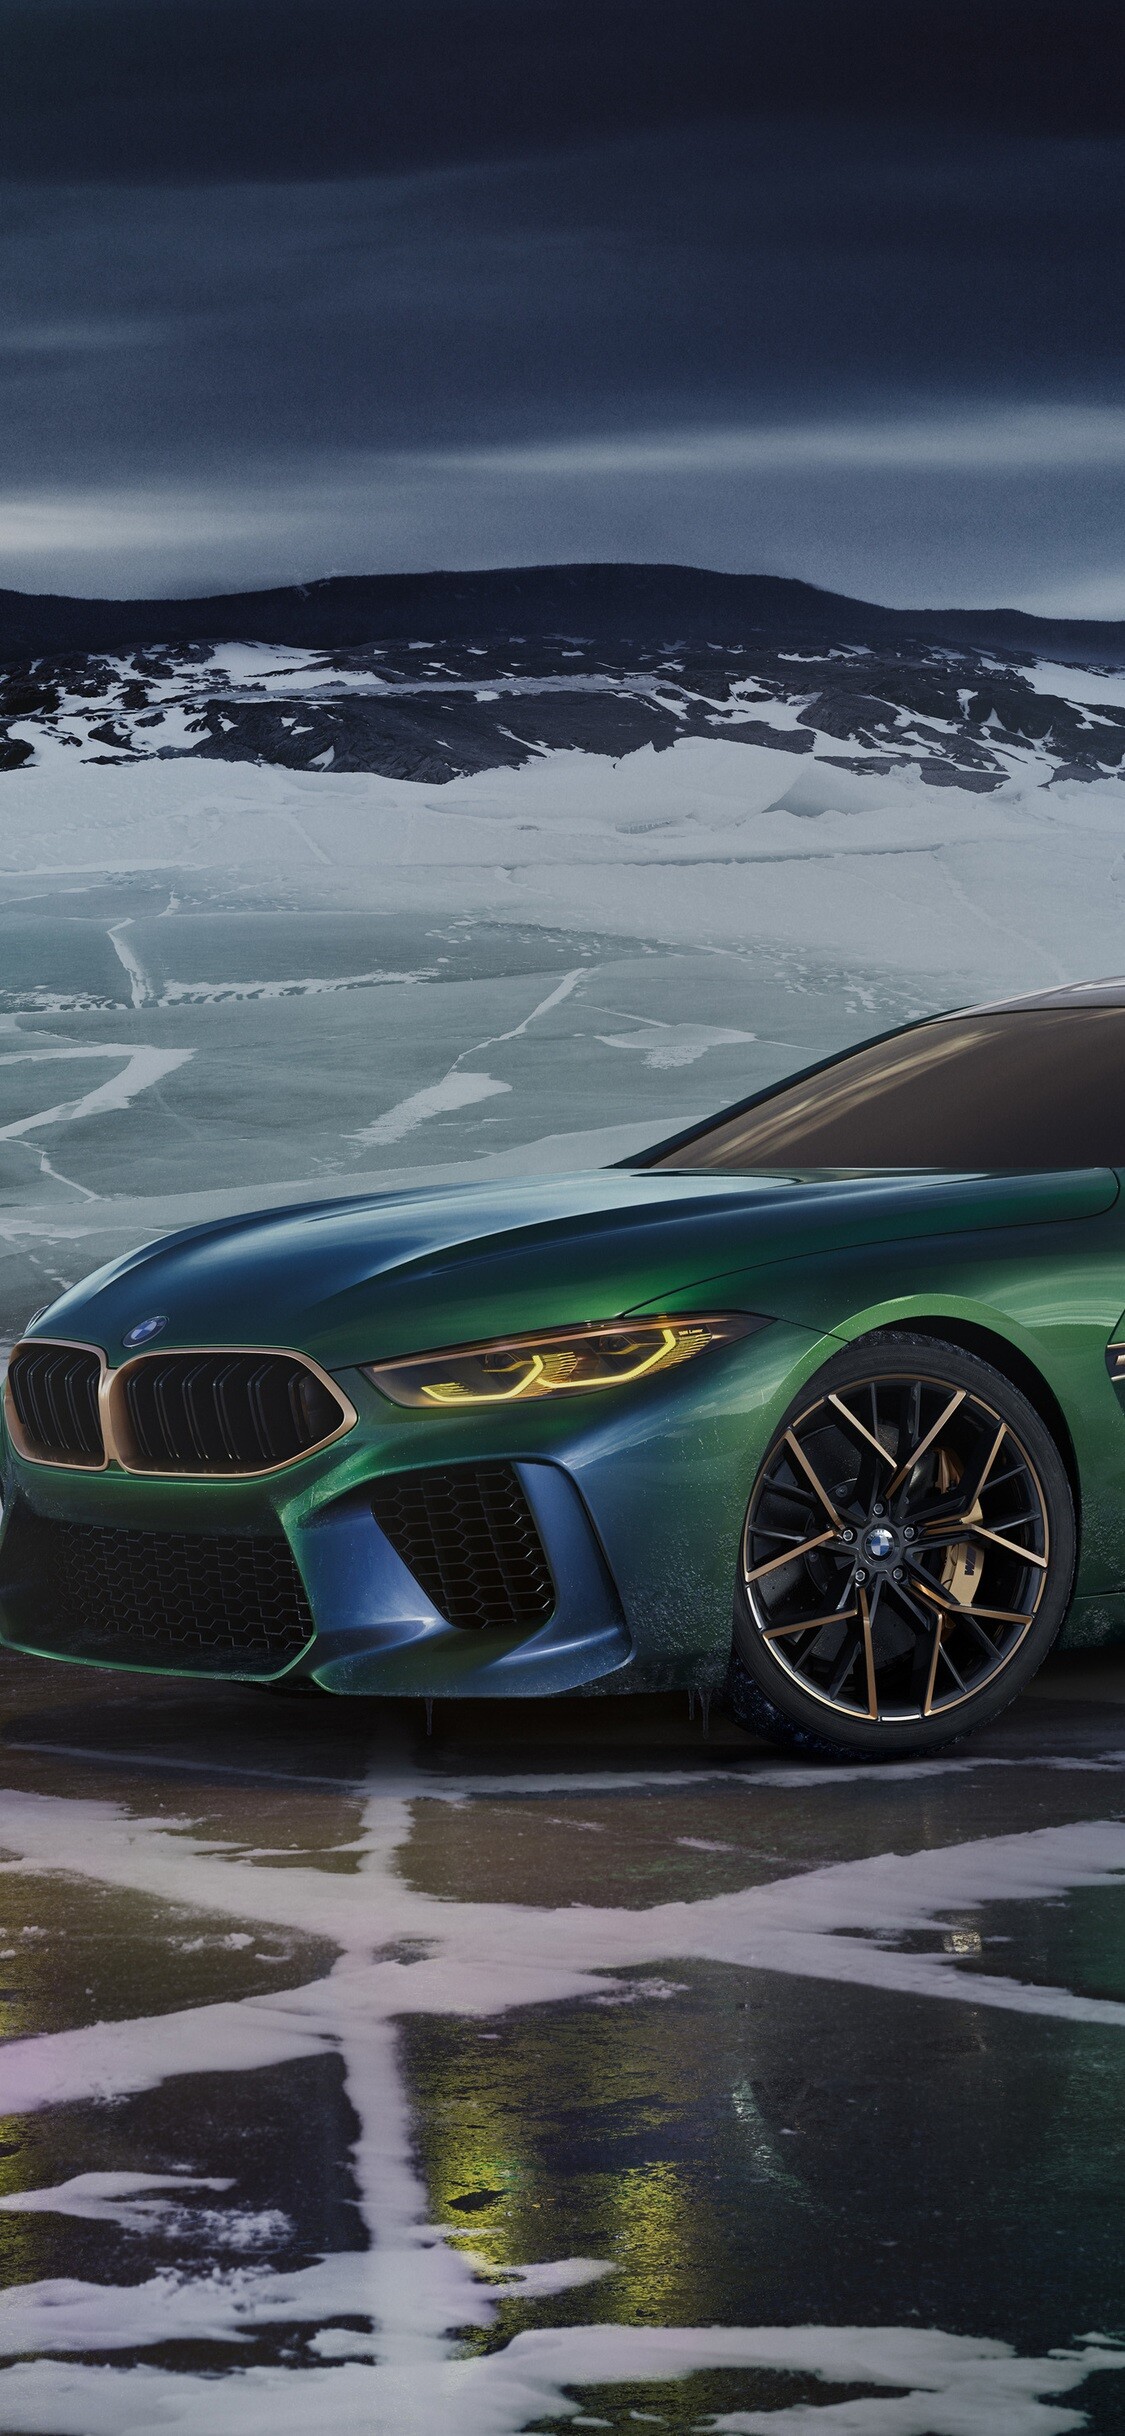 BMW: A German automotive manufacturer of luxury vehicles, Known for technology and style. 1130x2440 HD Wallpaper.